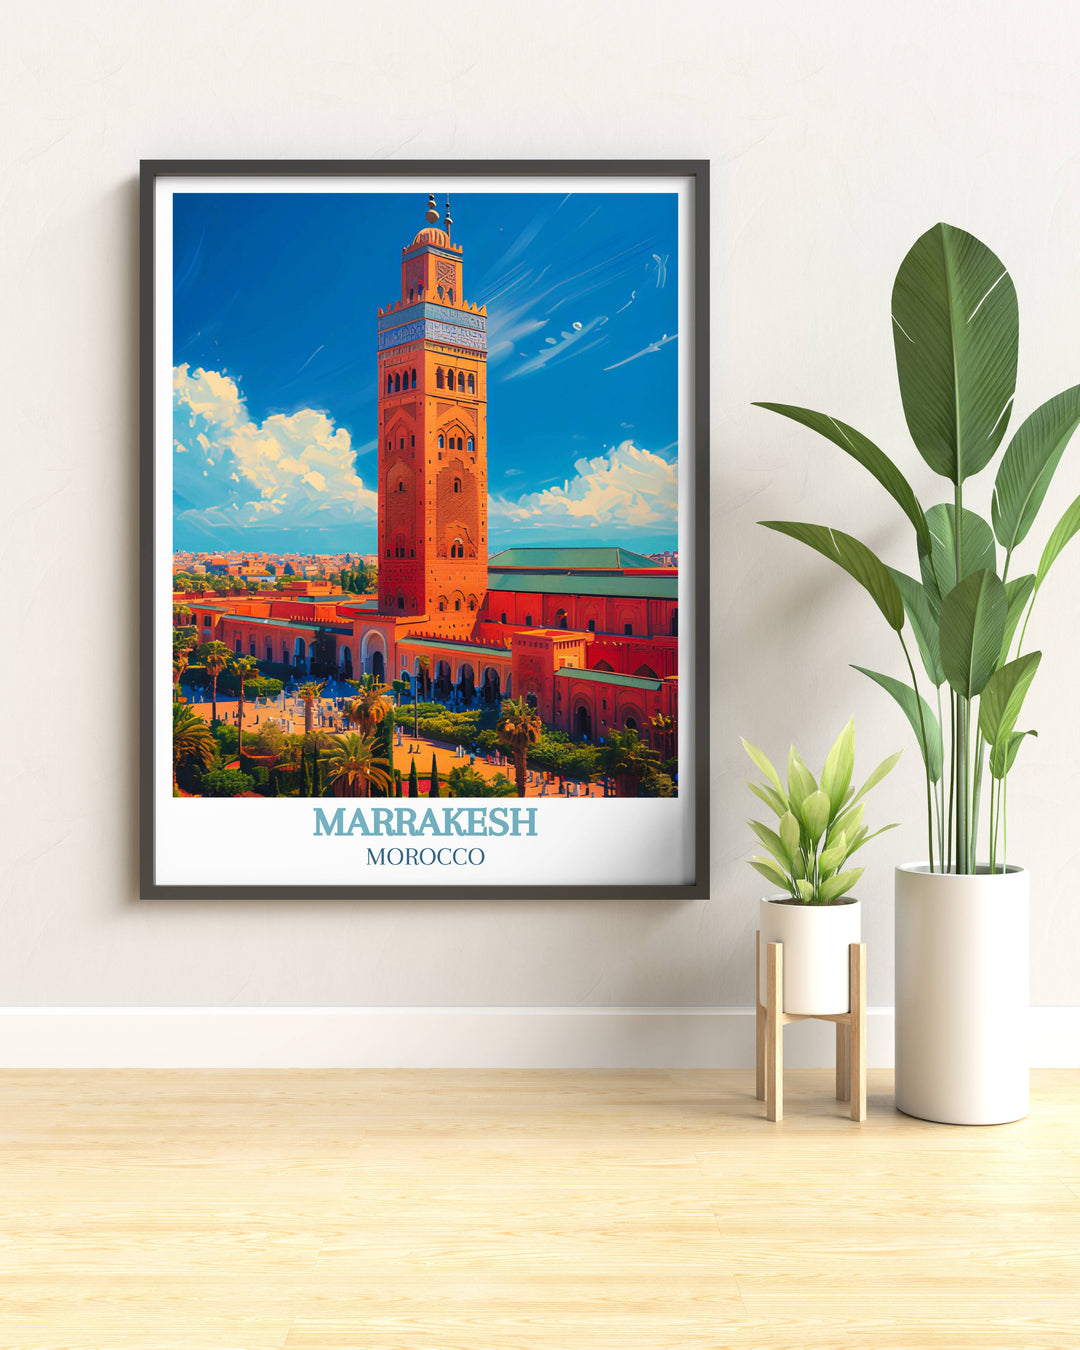 Vintage Moroccan poster featuring classic designs and cultural symbols from historic Marrakesh.